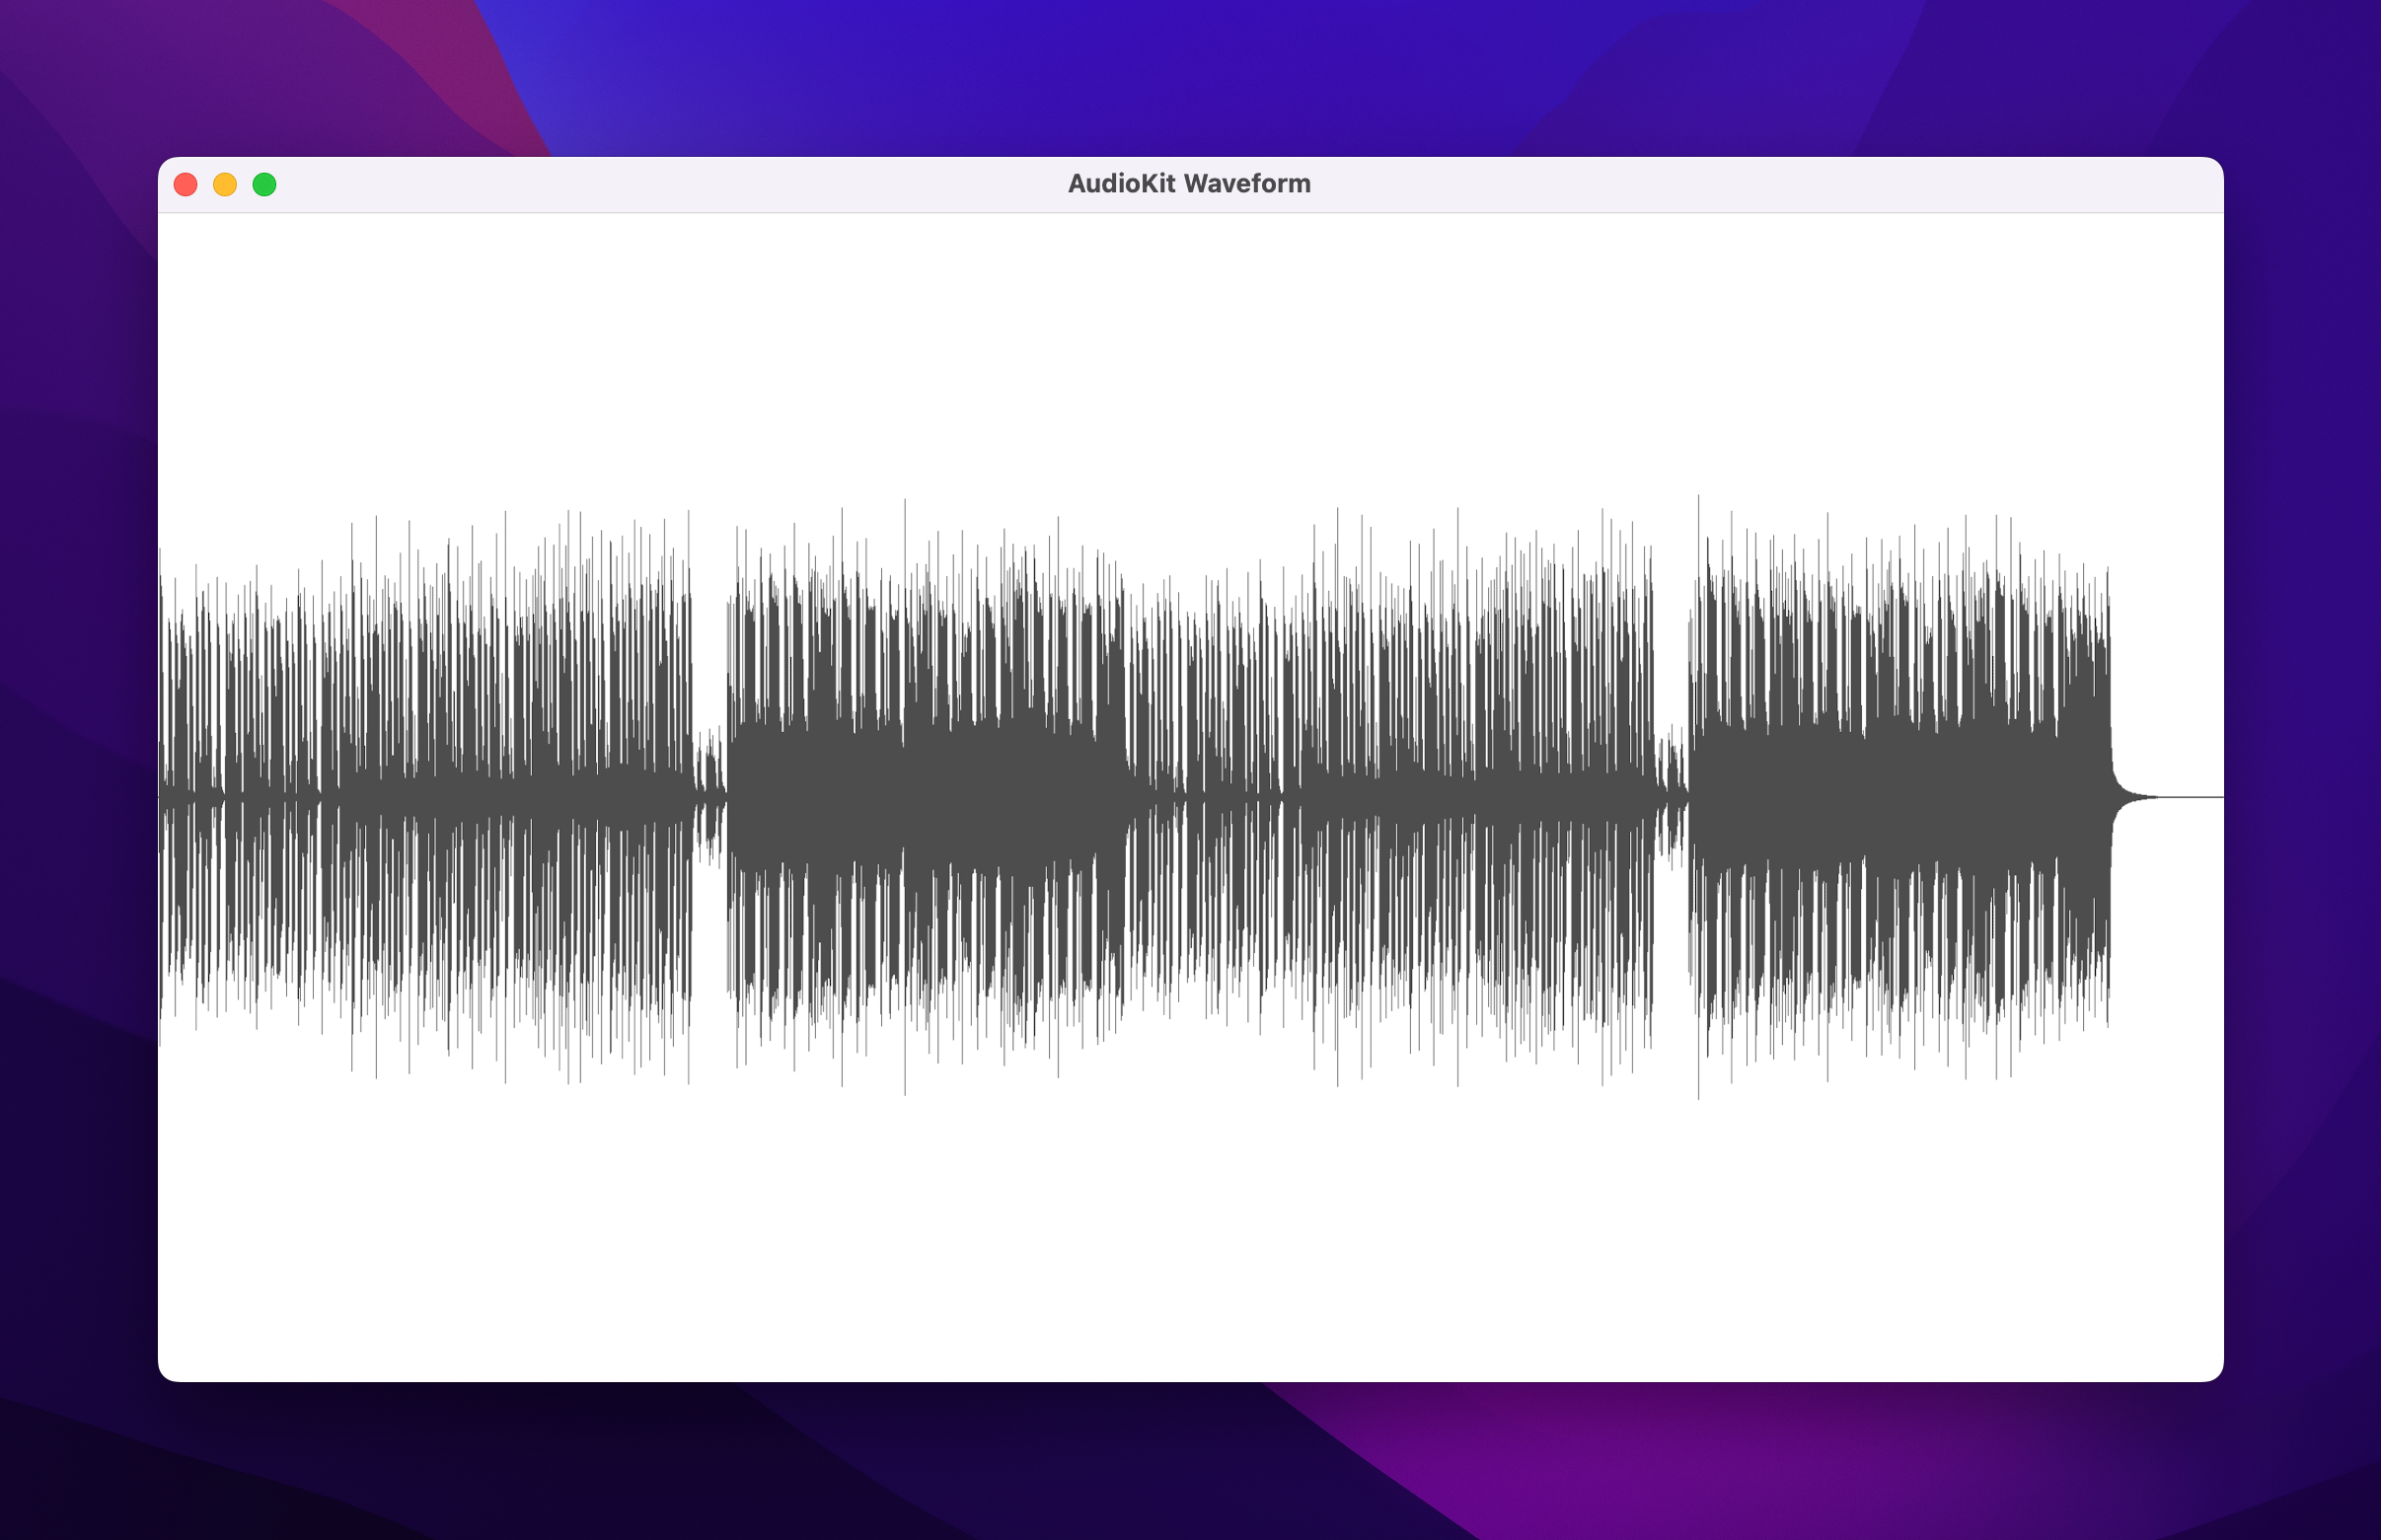 An image displaying the fully drawn waveform